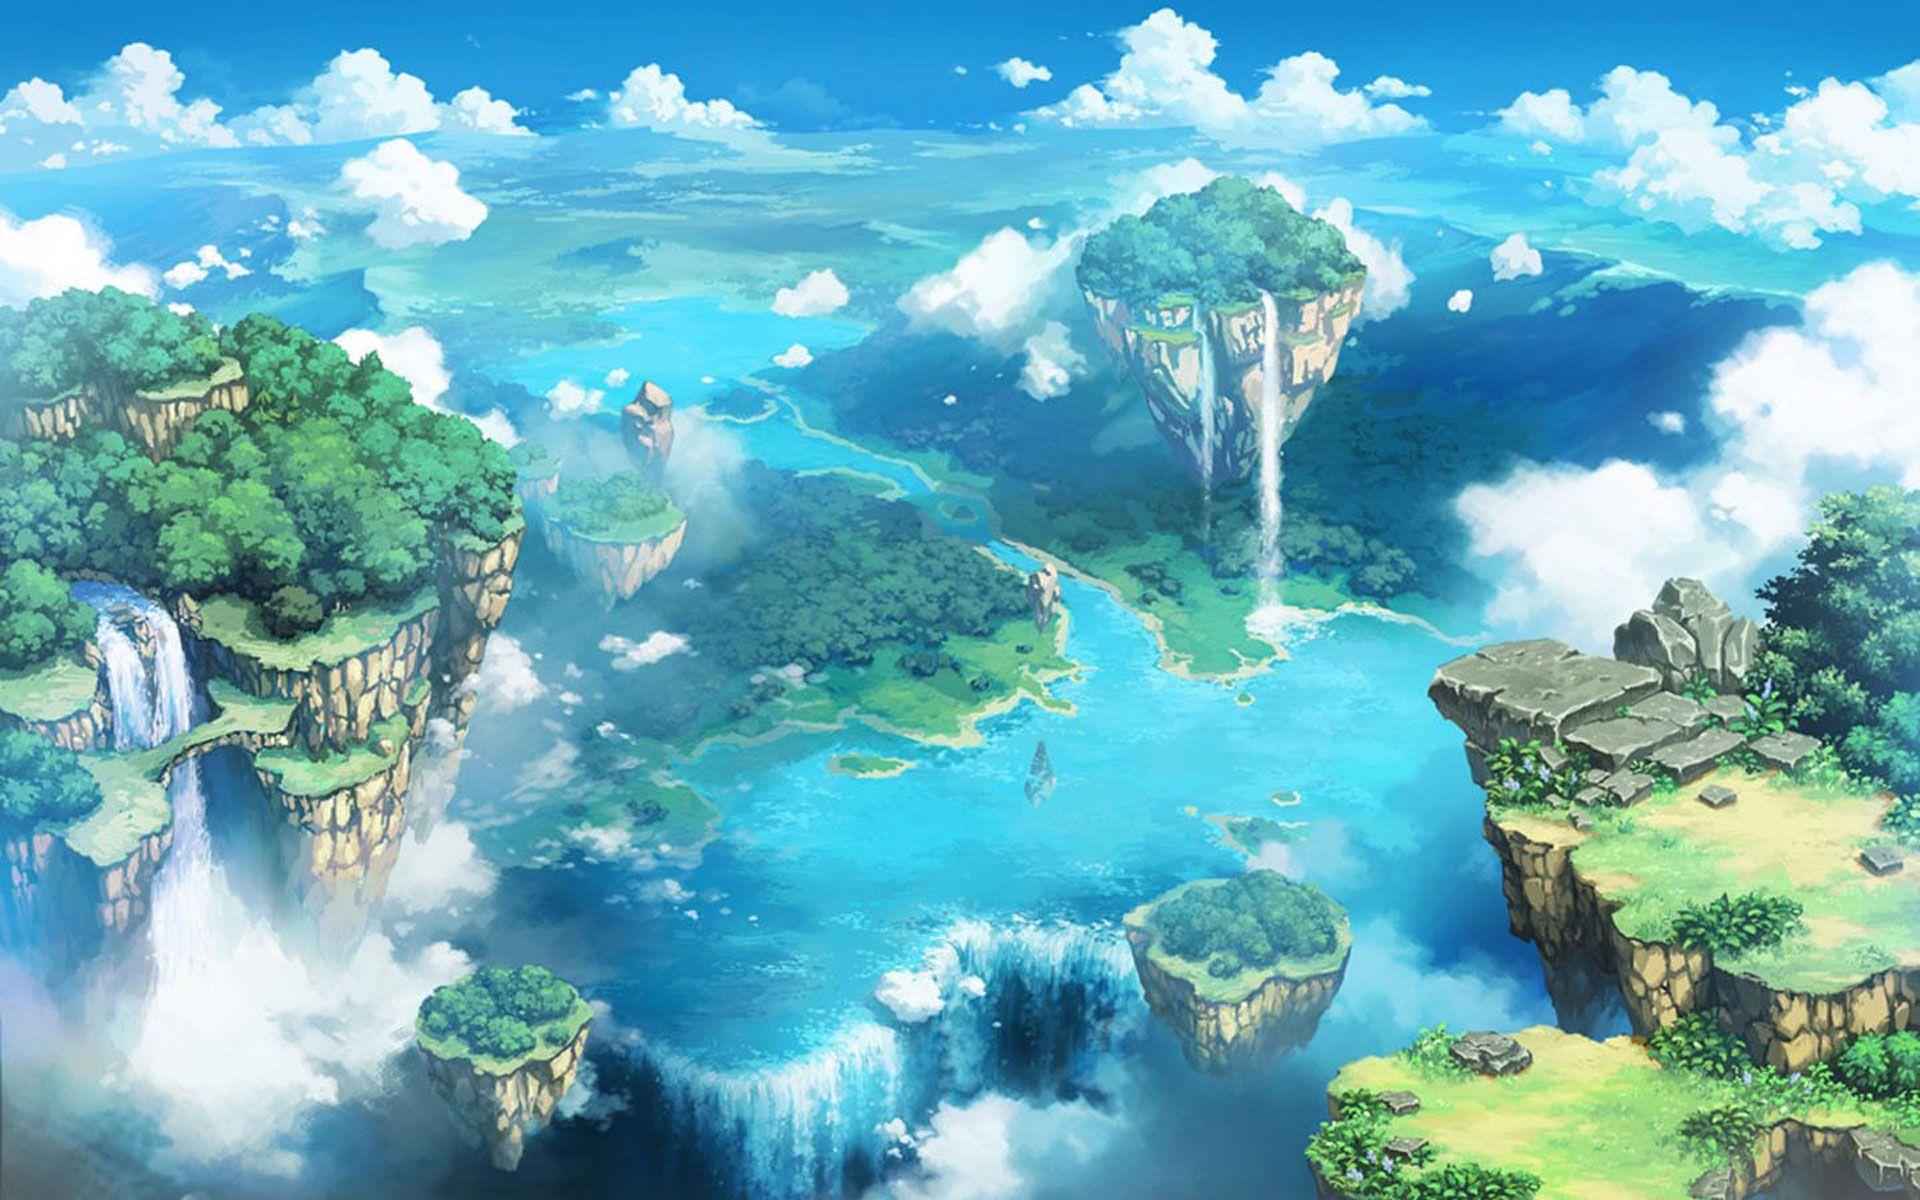 Backgrounds Anime Landscape Download in